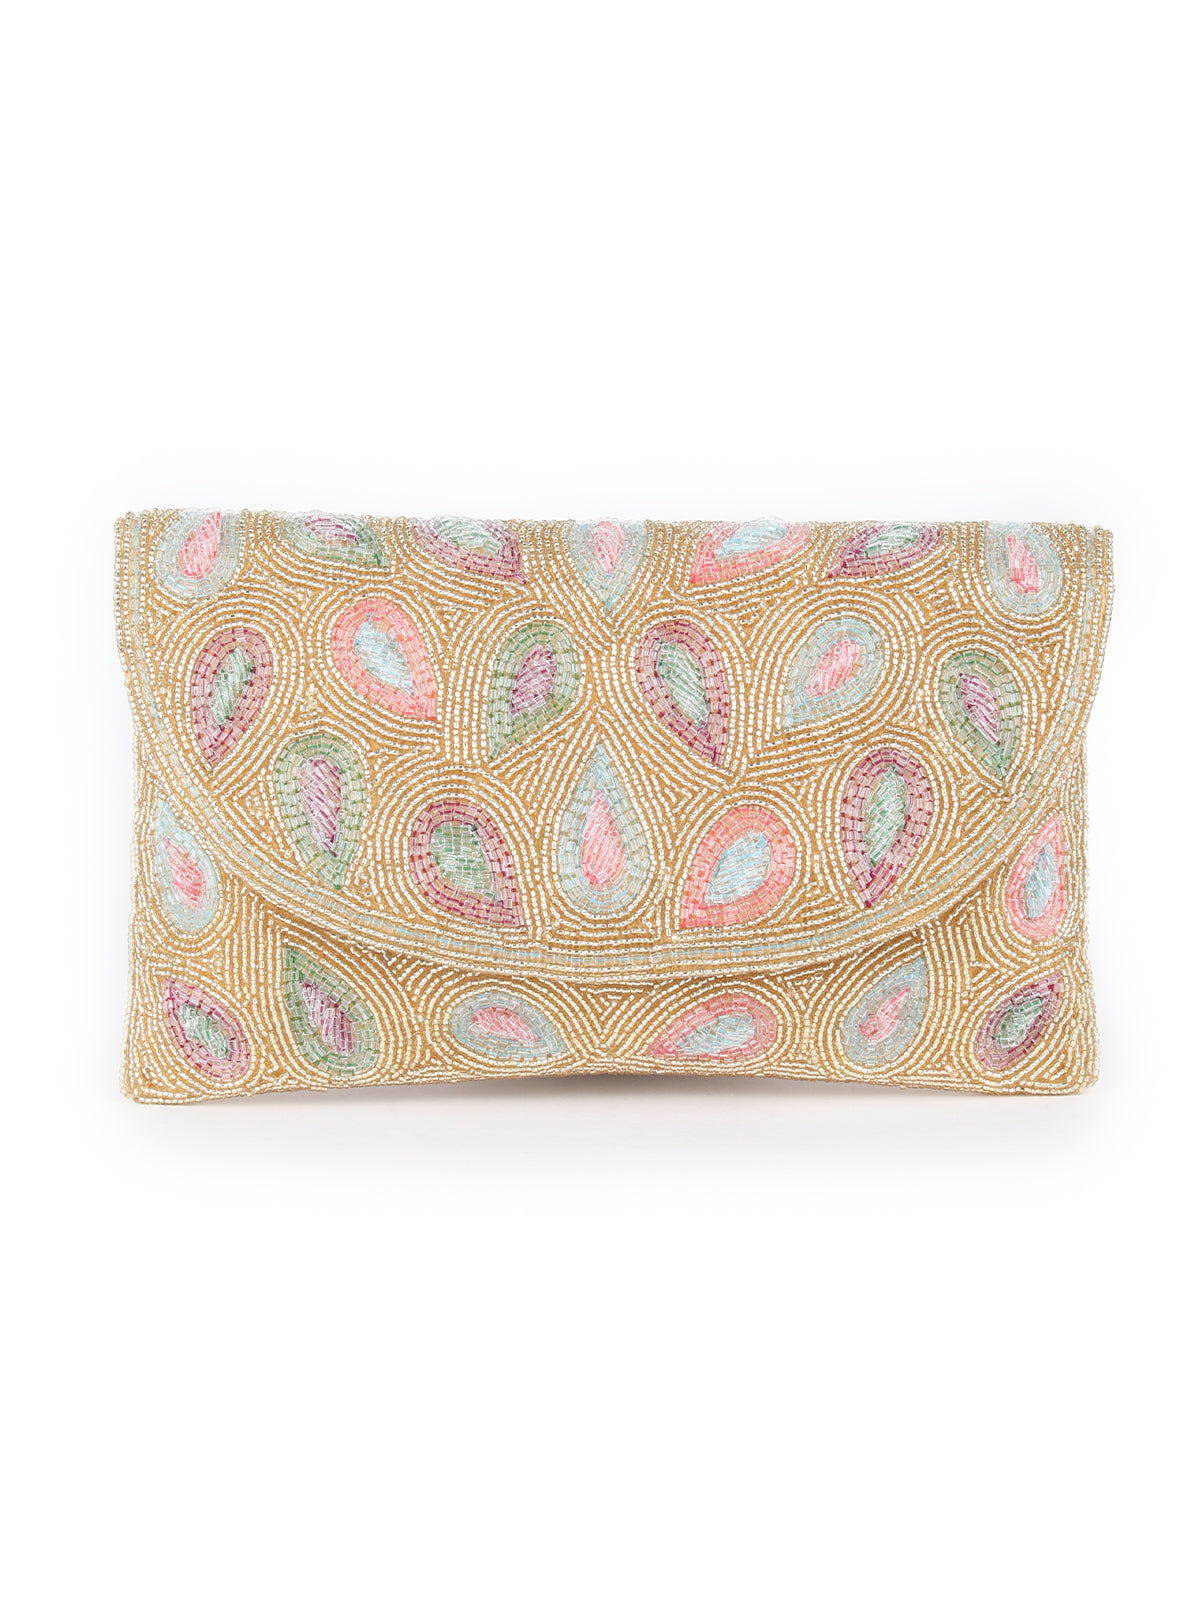 Odette Multicolor Beads Embroidered Envelope Clutch for Women